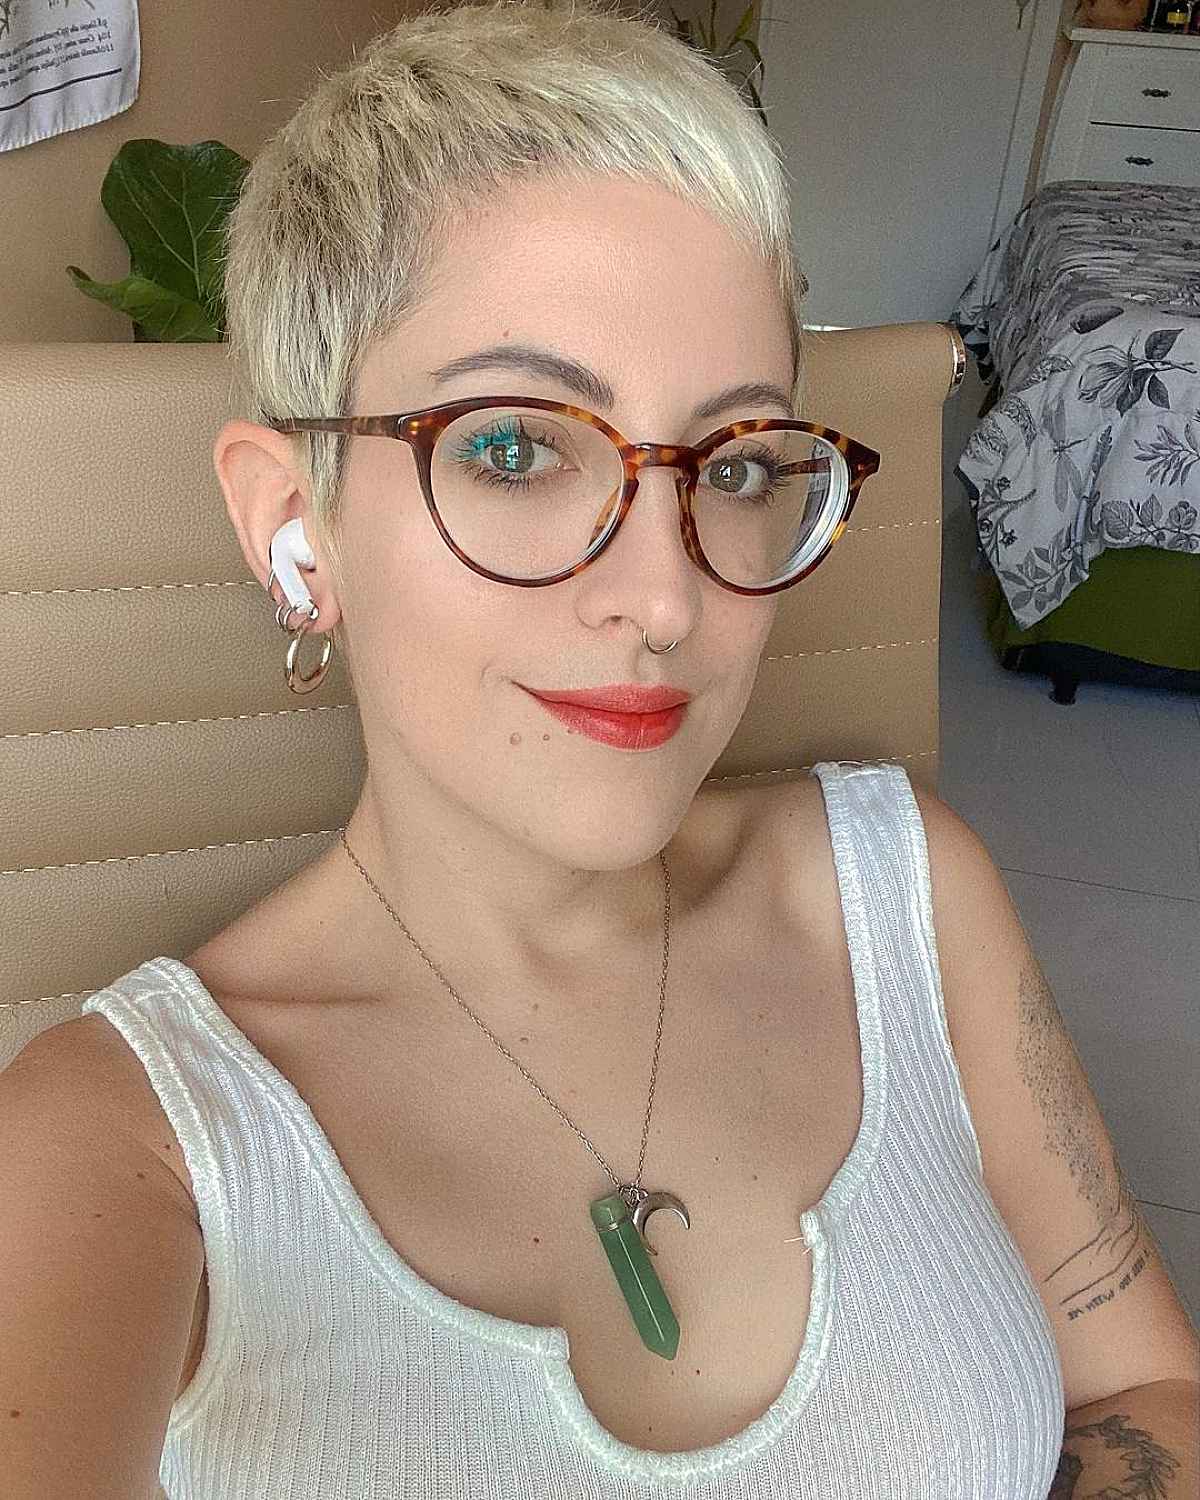 Super Short Pixie for Women with Glasses